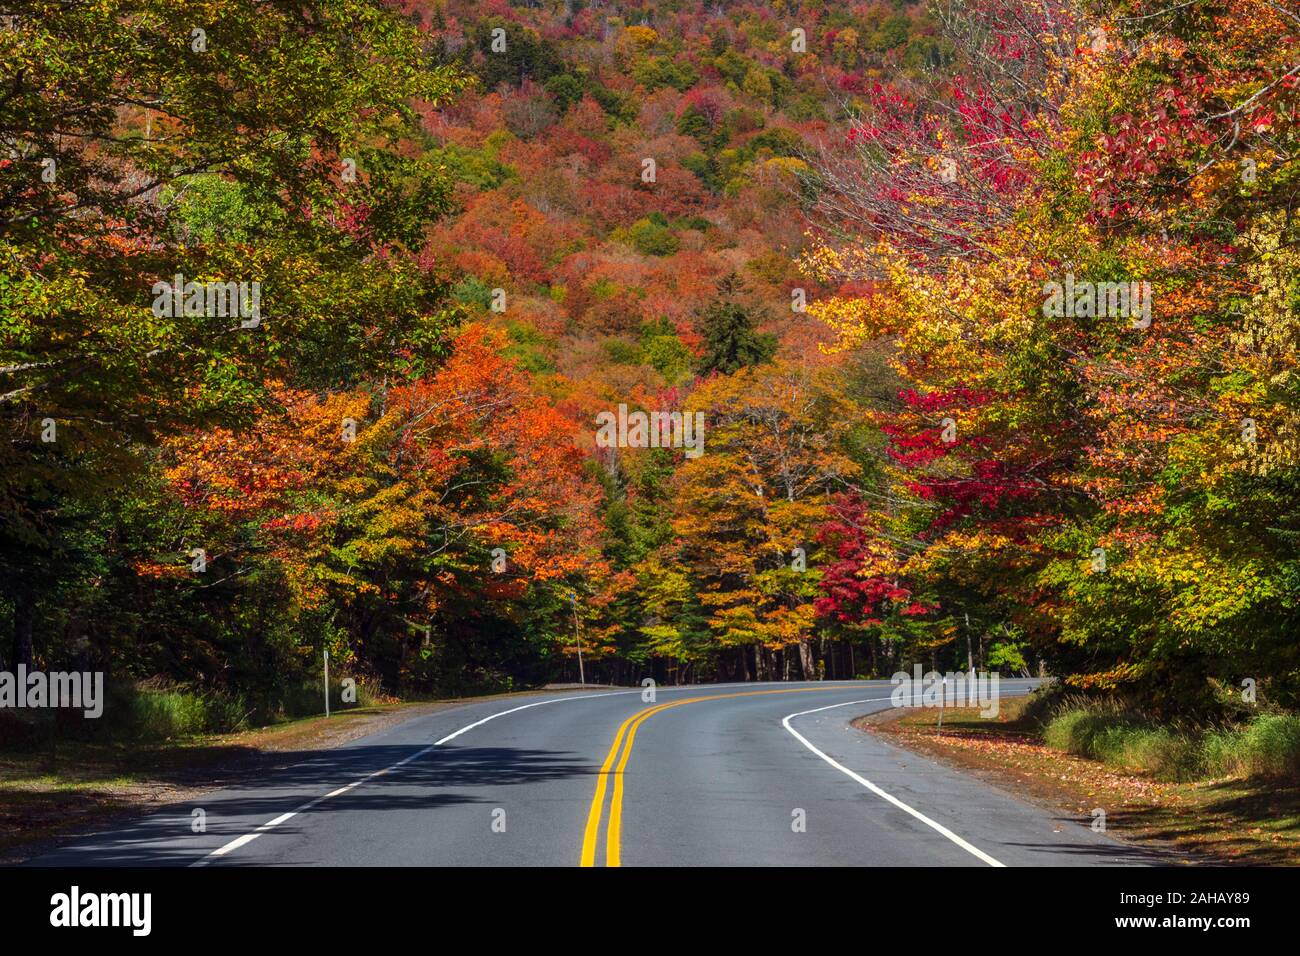 A bend in the road leads into the colorful forest displaying vibrant mountain colors. Stock Photo